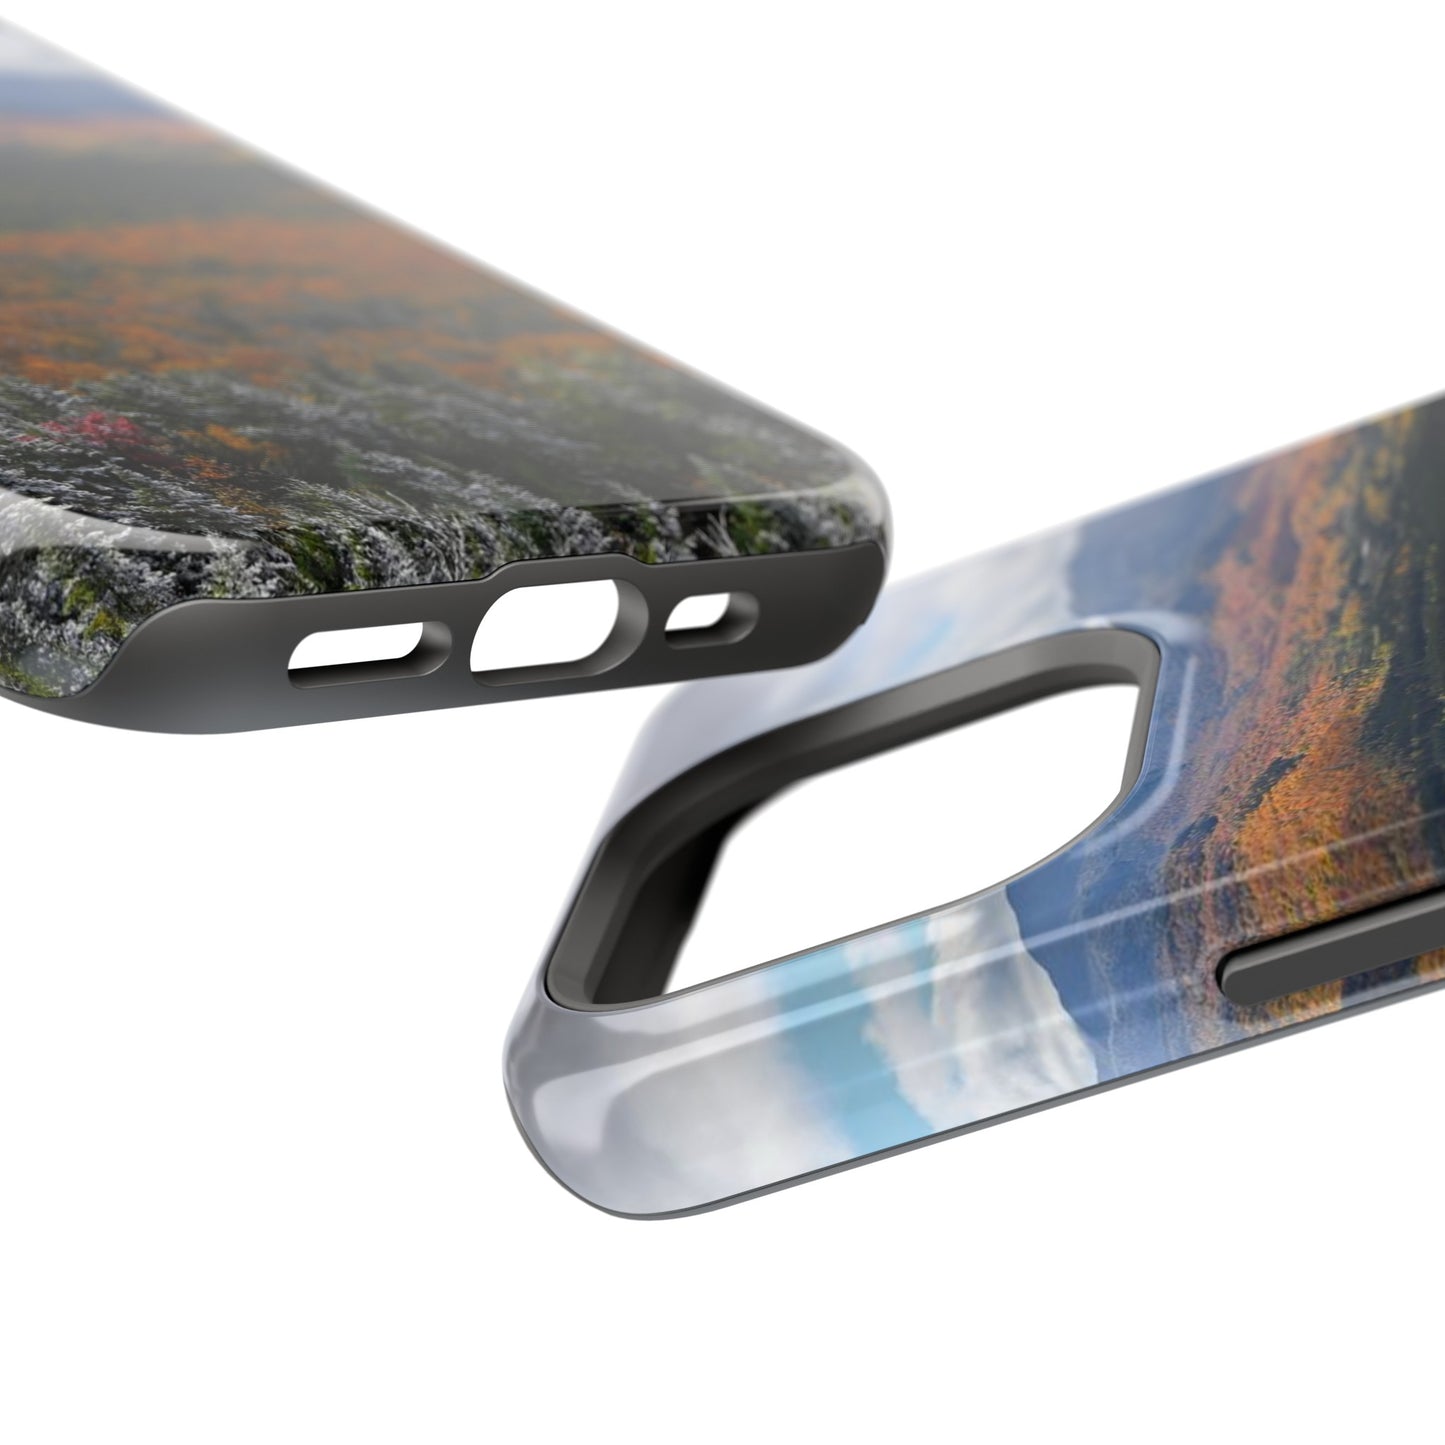 MagSafe Impact Resistant Phone Case - Frosty Fall Day, Mt. Van Hoevenberg